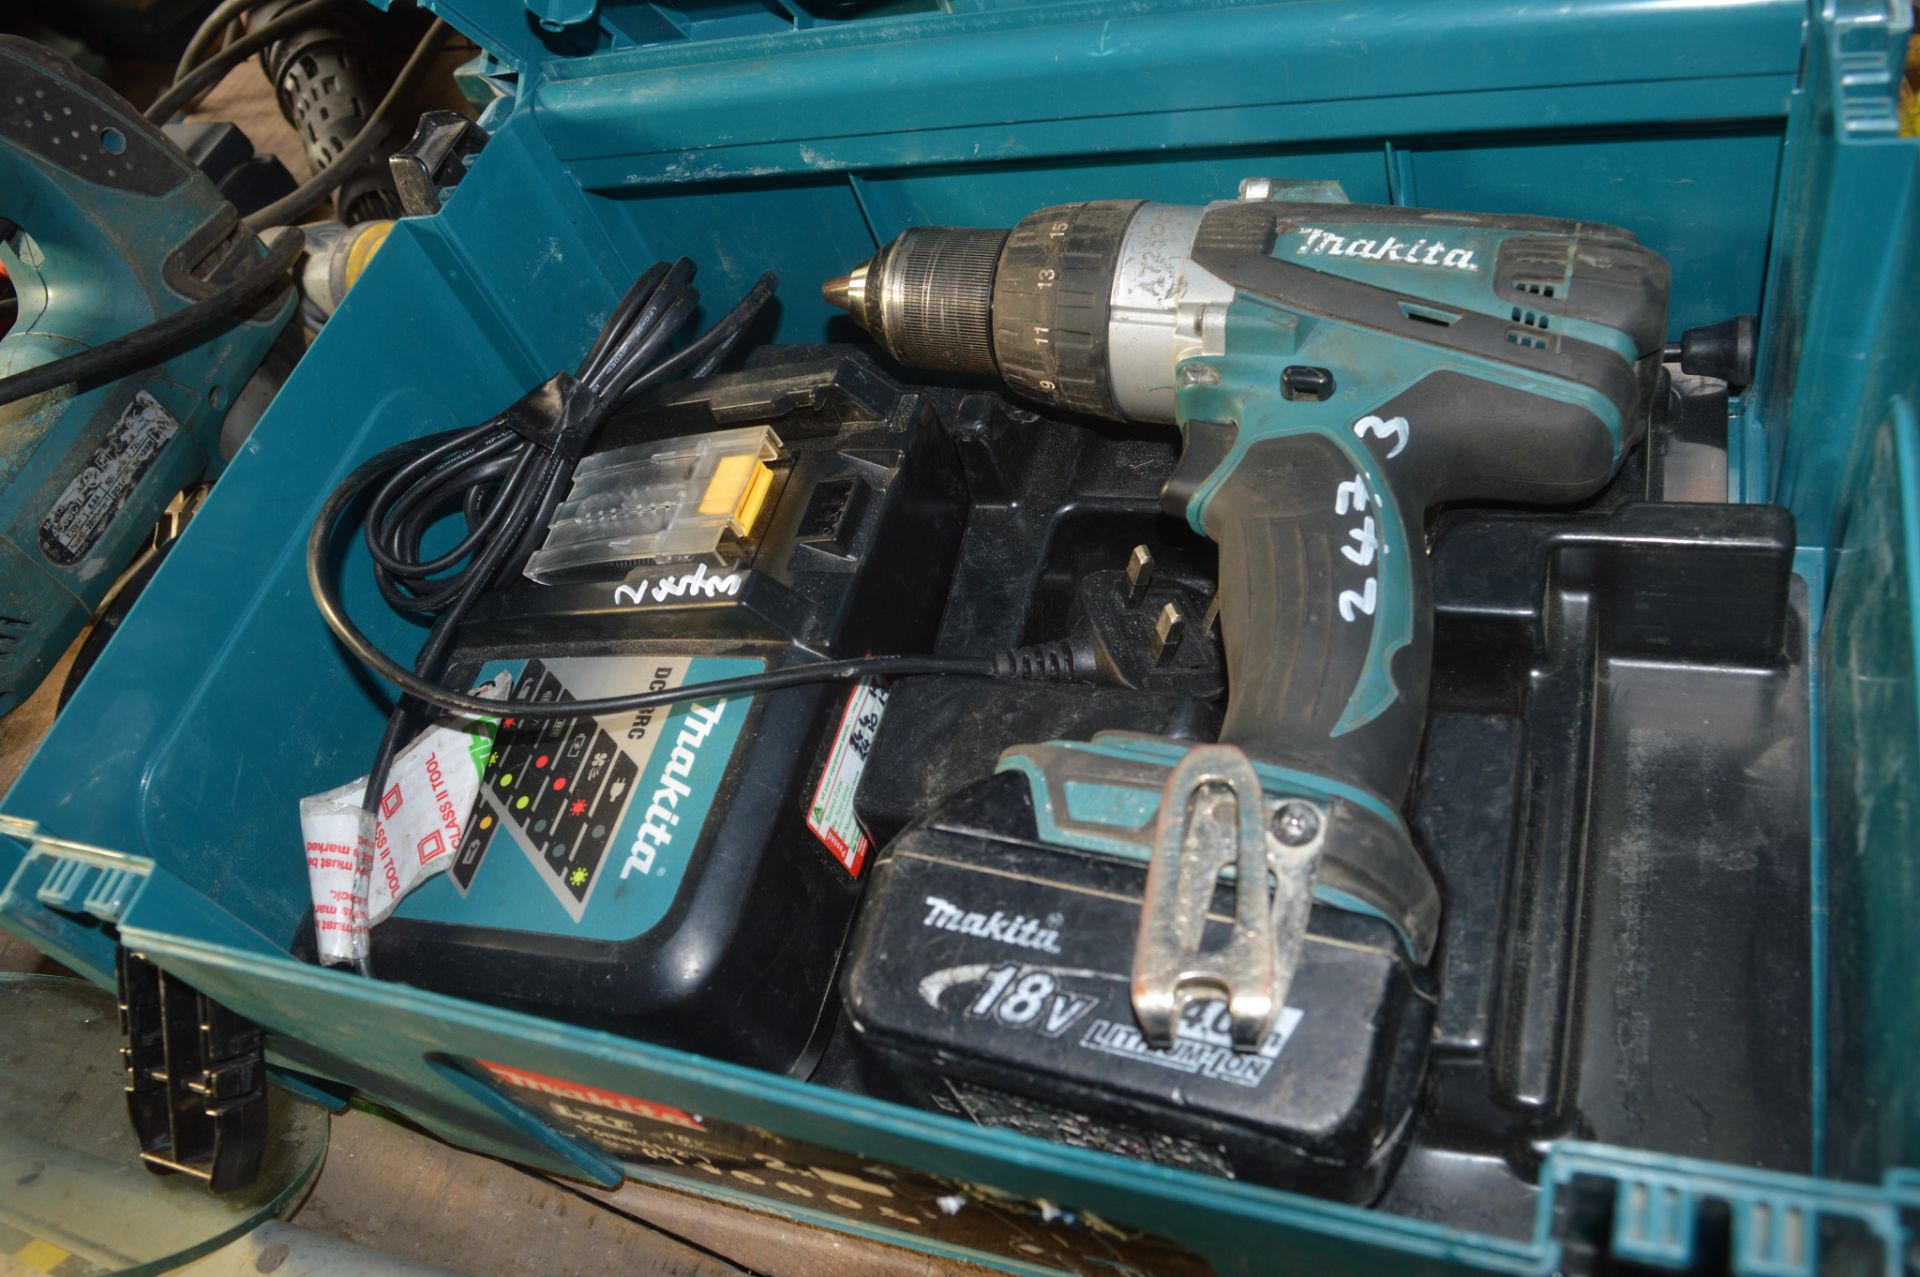 MAKITA 18 volt cordless power drill Complete with charger, battery and carry case A723062